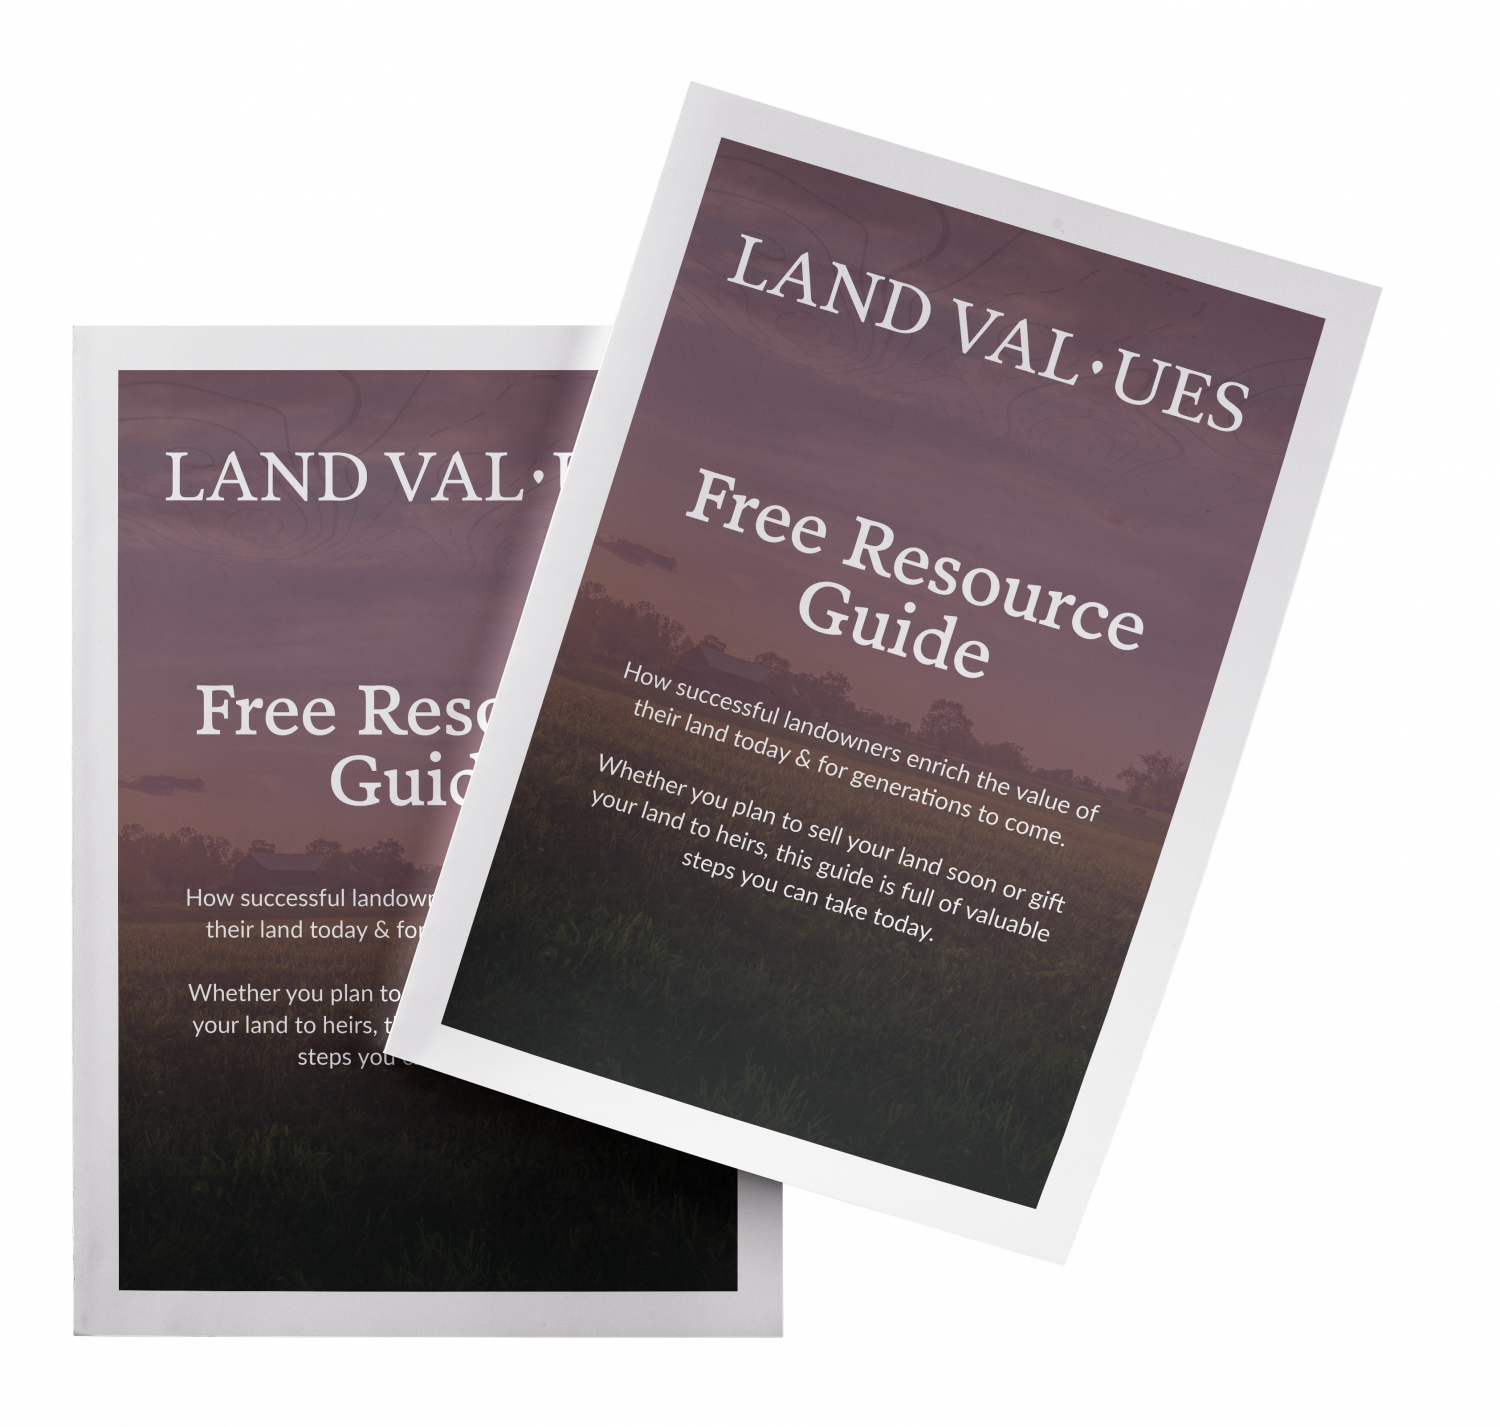 Land Values Free Resource Guide - How successful landowners enrich the value of their land today & for generations to come. Whether you plan to sell your land soon or gift your land to heirs, this guide is full of valuable steps you can take today.